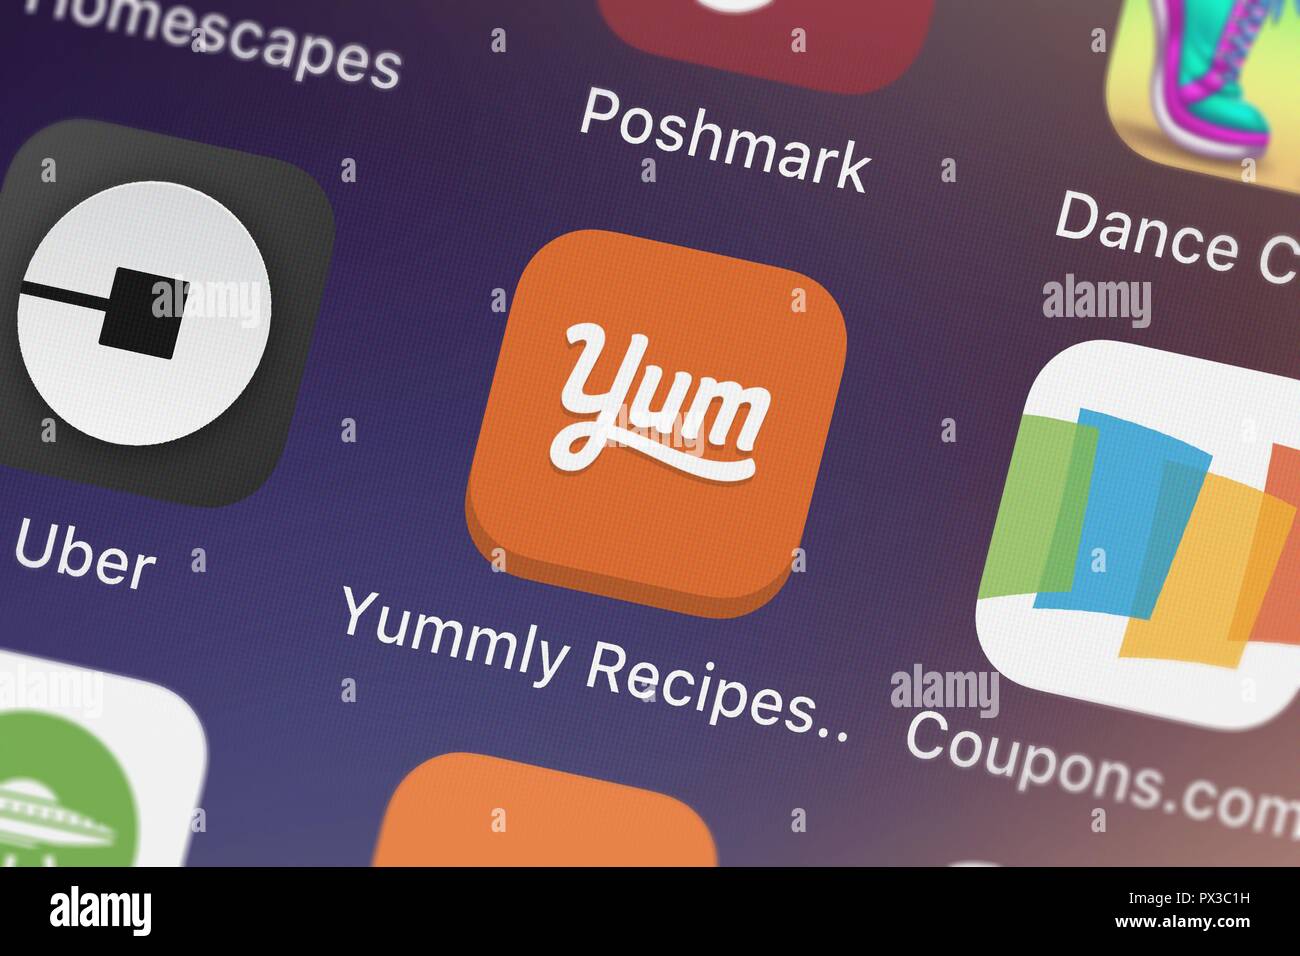 London, United Kingdom - October 19, 2018: Screenshot of the Yummly Recipes  Shopping List mobile app from Yummly icon on an iPhone. Stock Photo